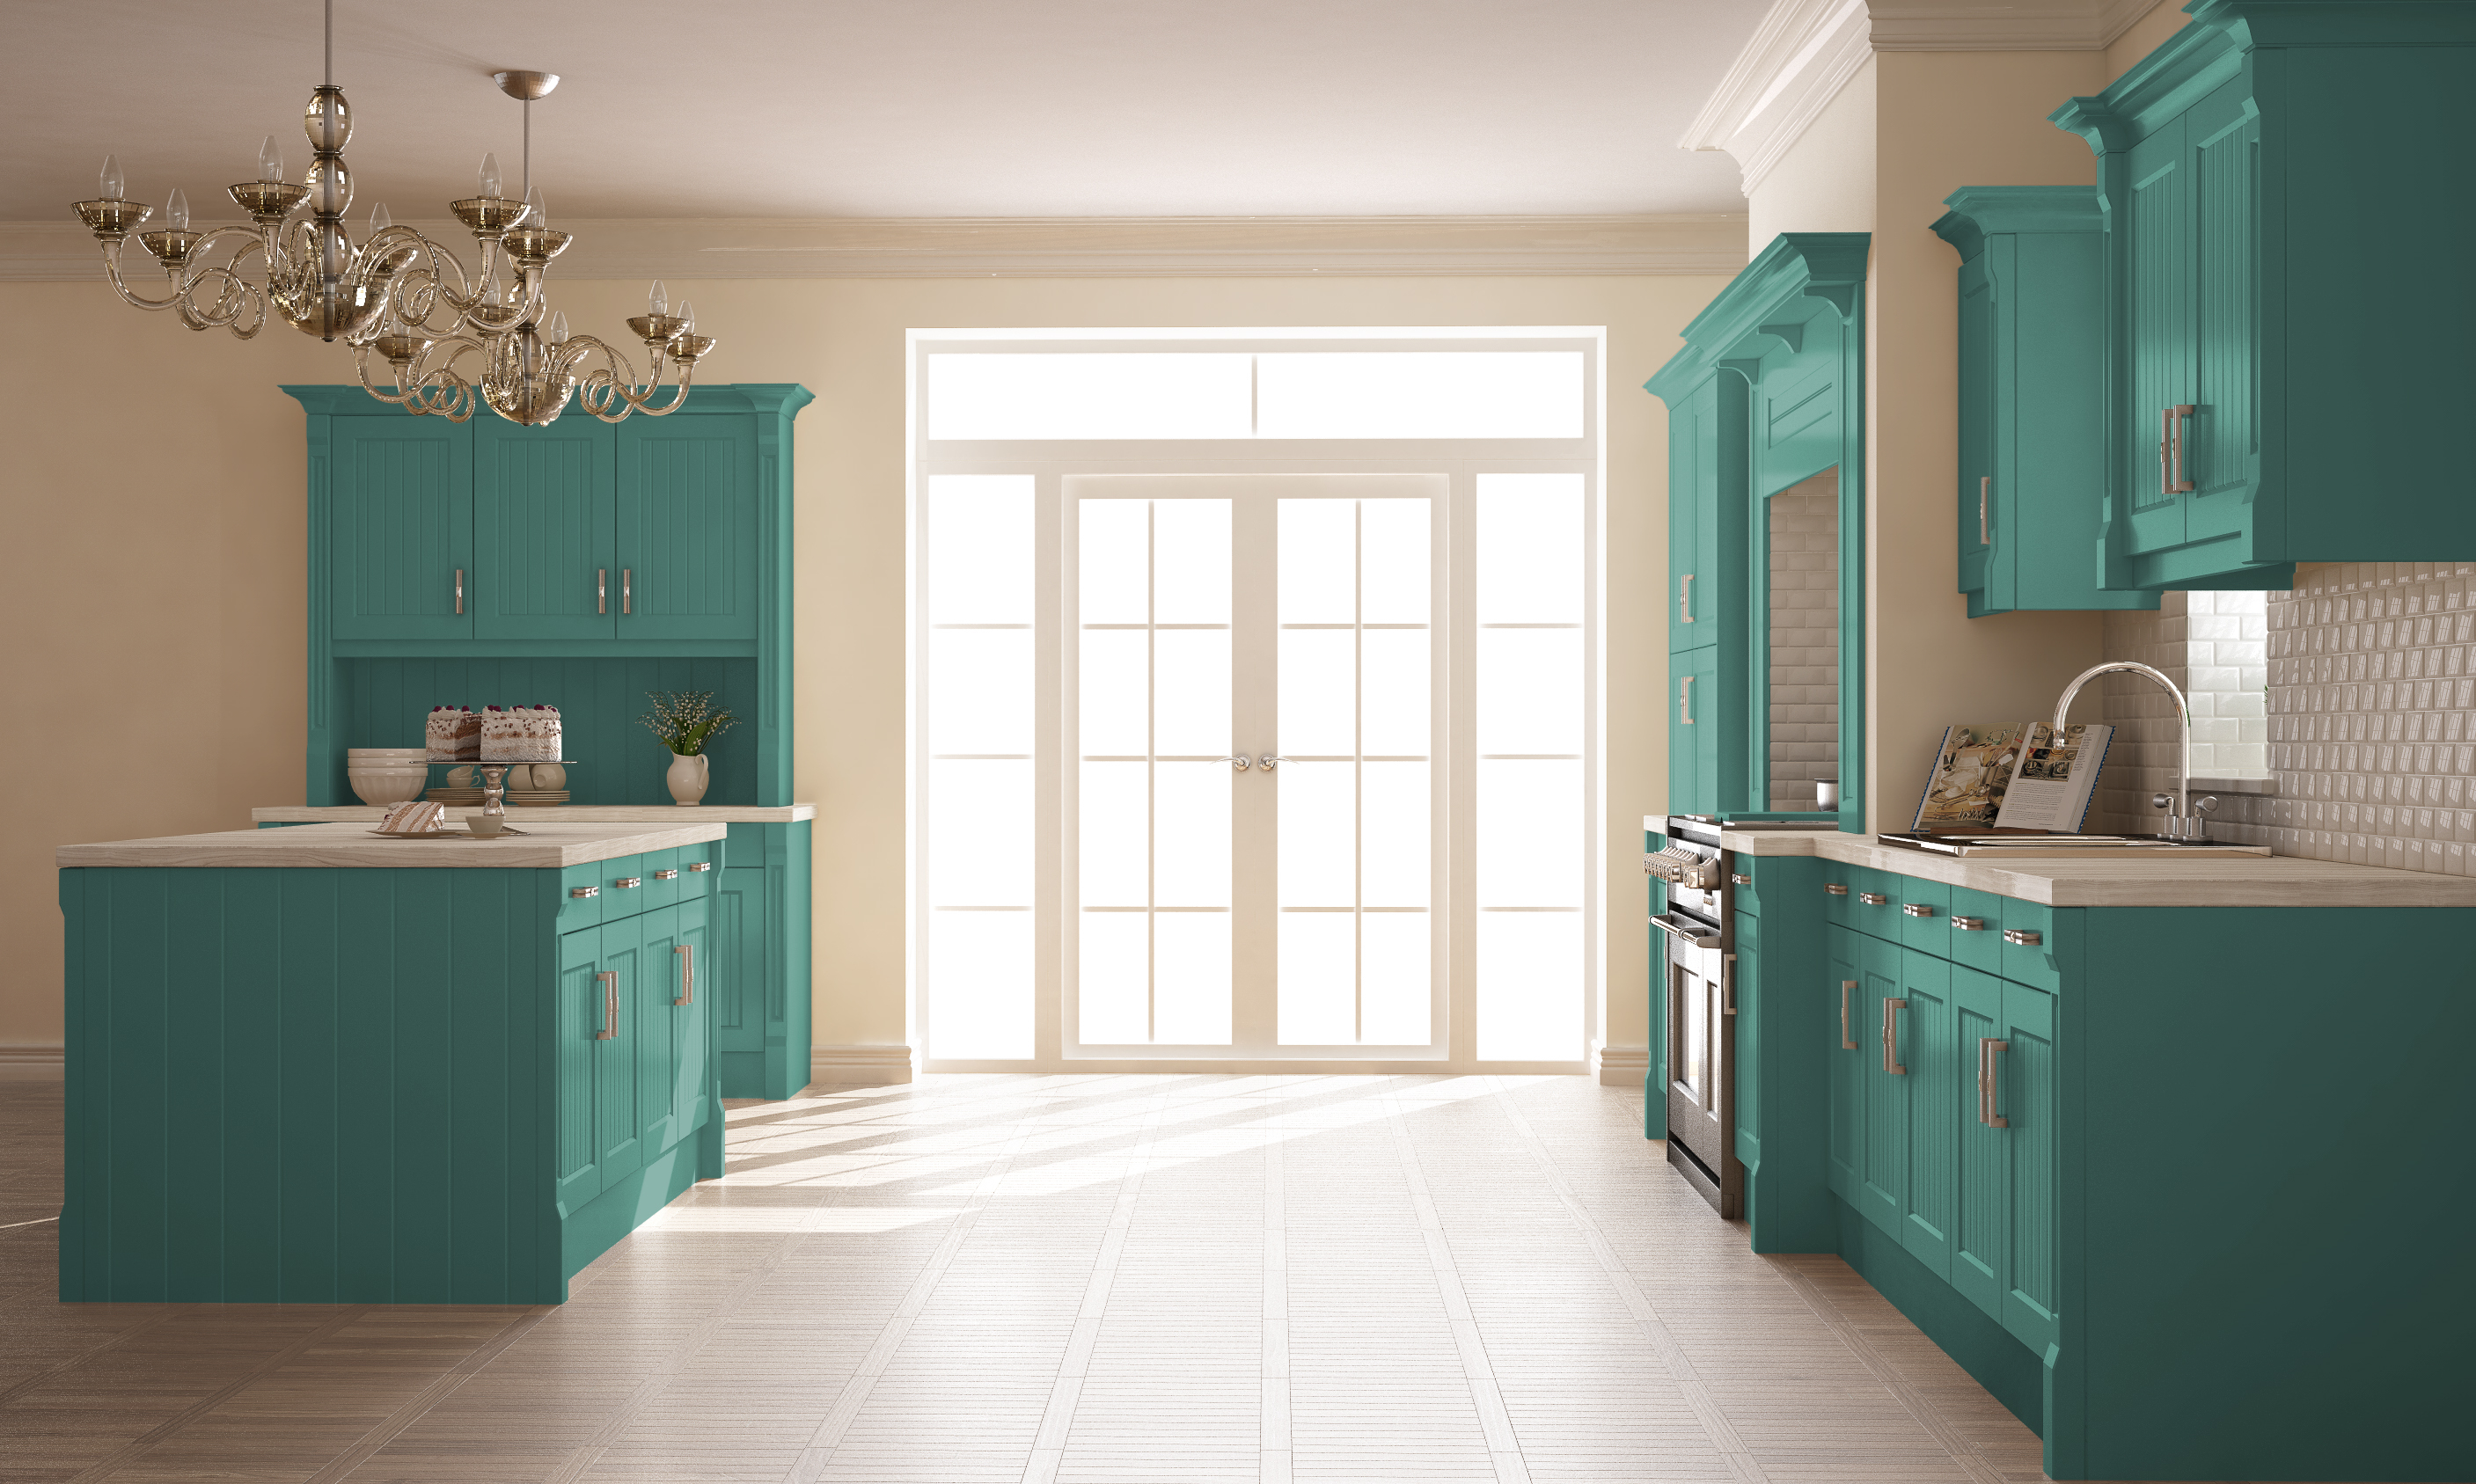 Kitchen with teal colored cabinets